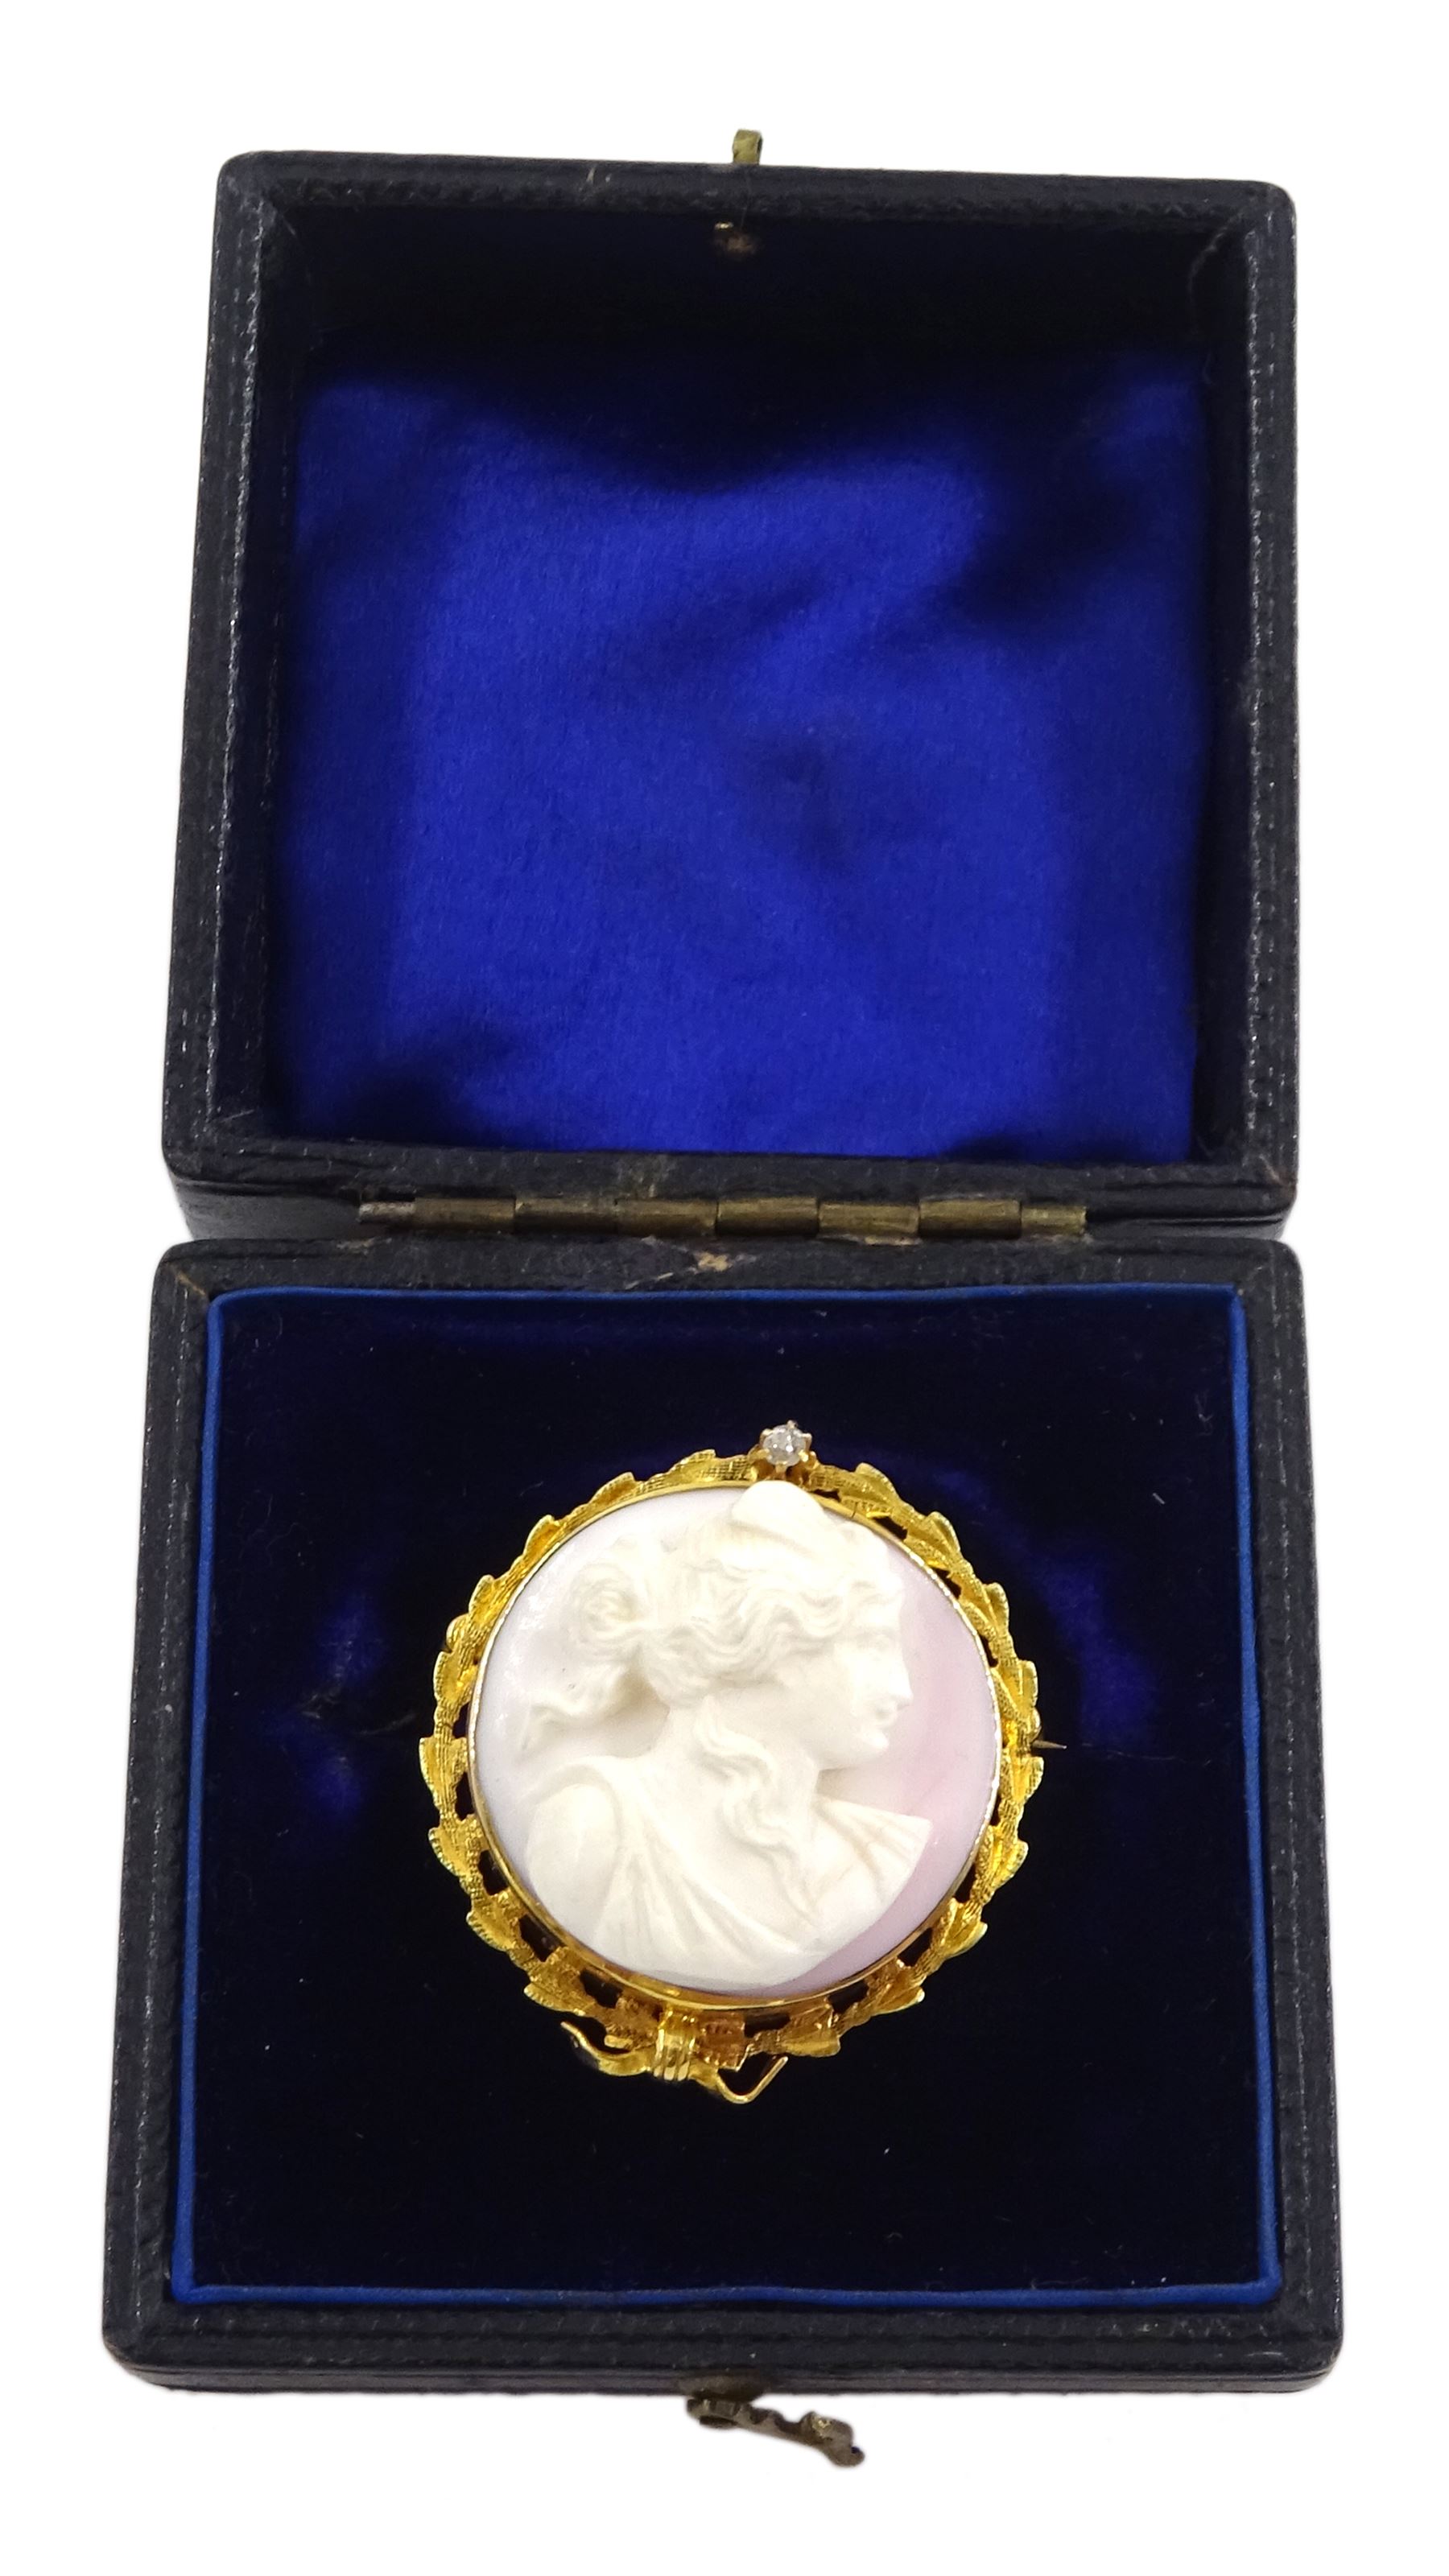 Gold conch shell cameo brooch - Image 2 of 3